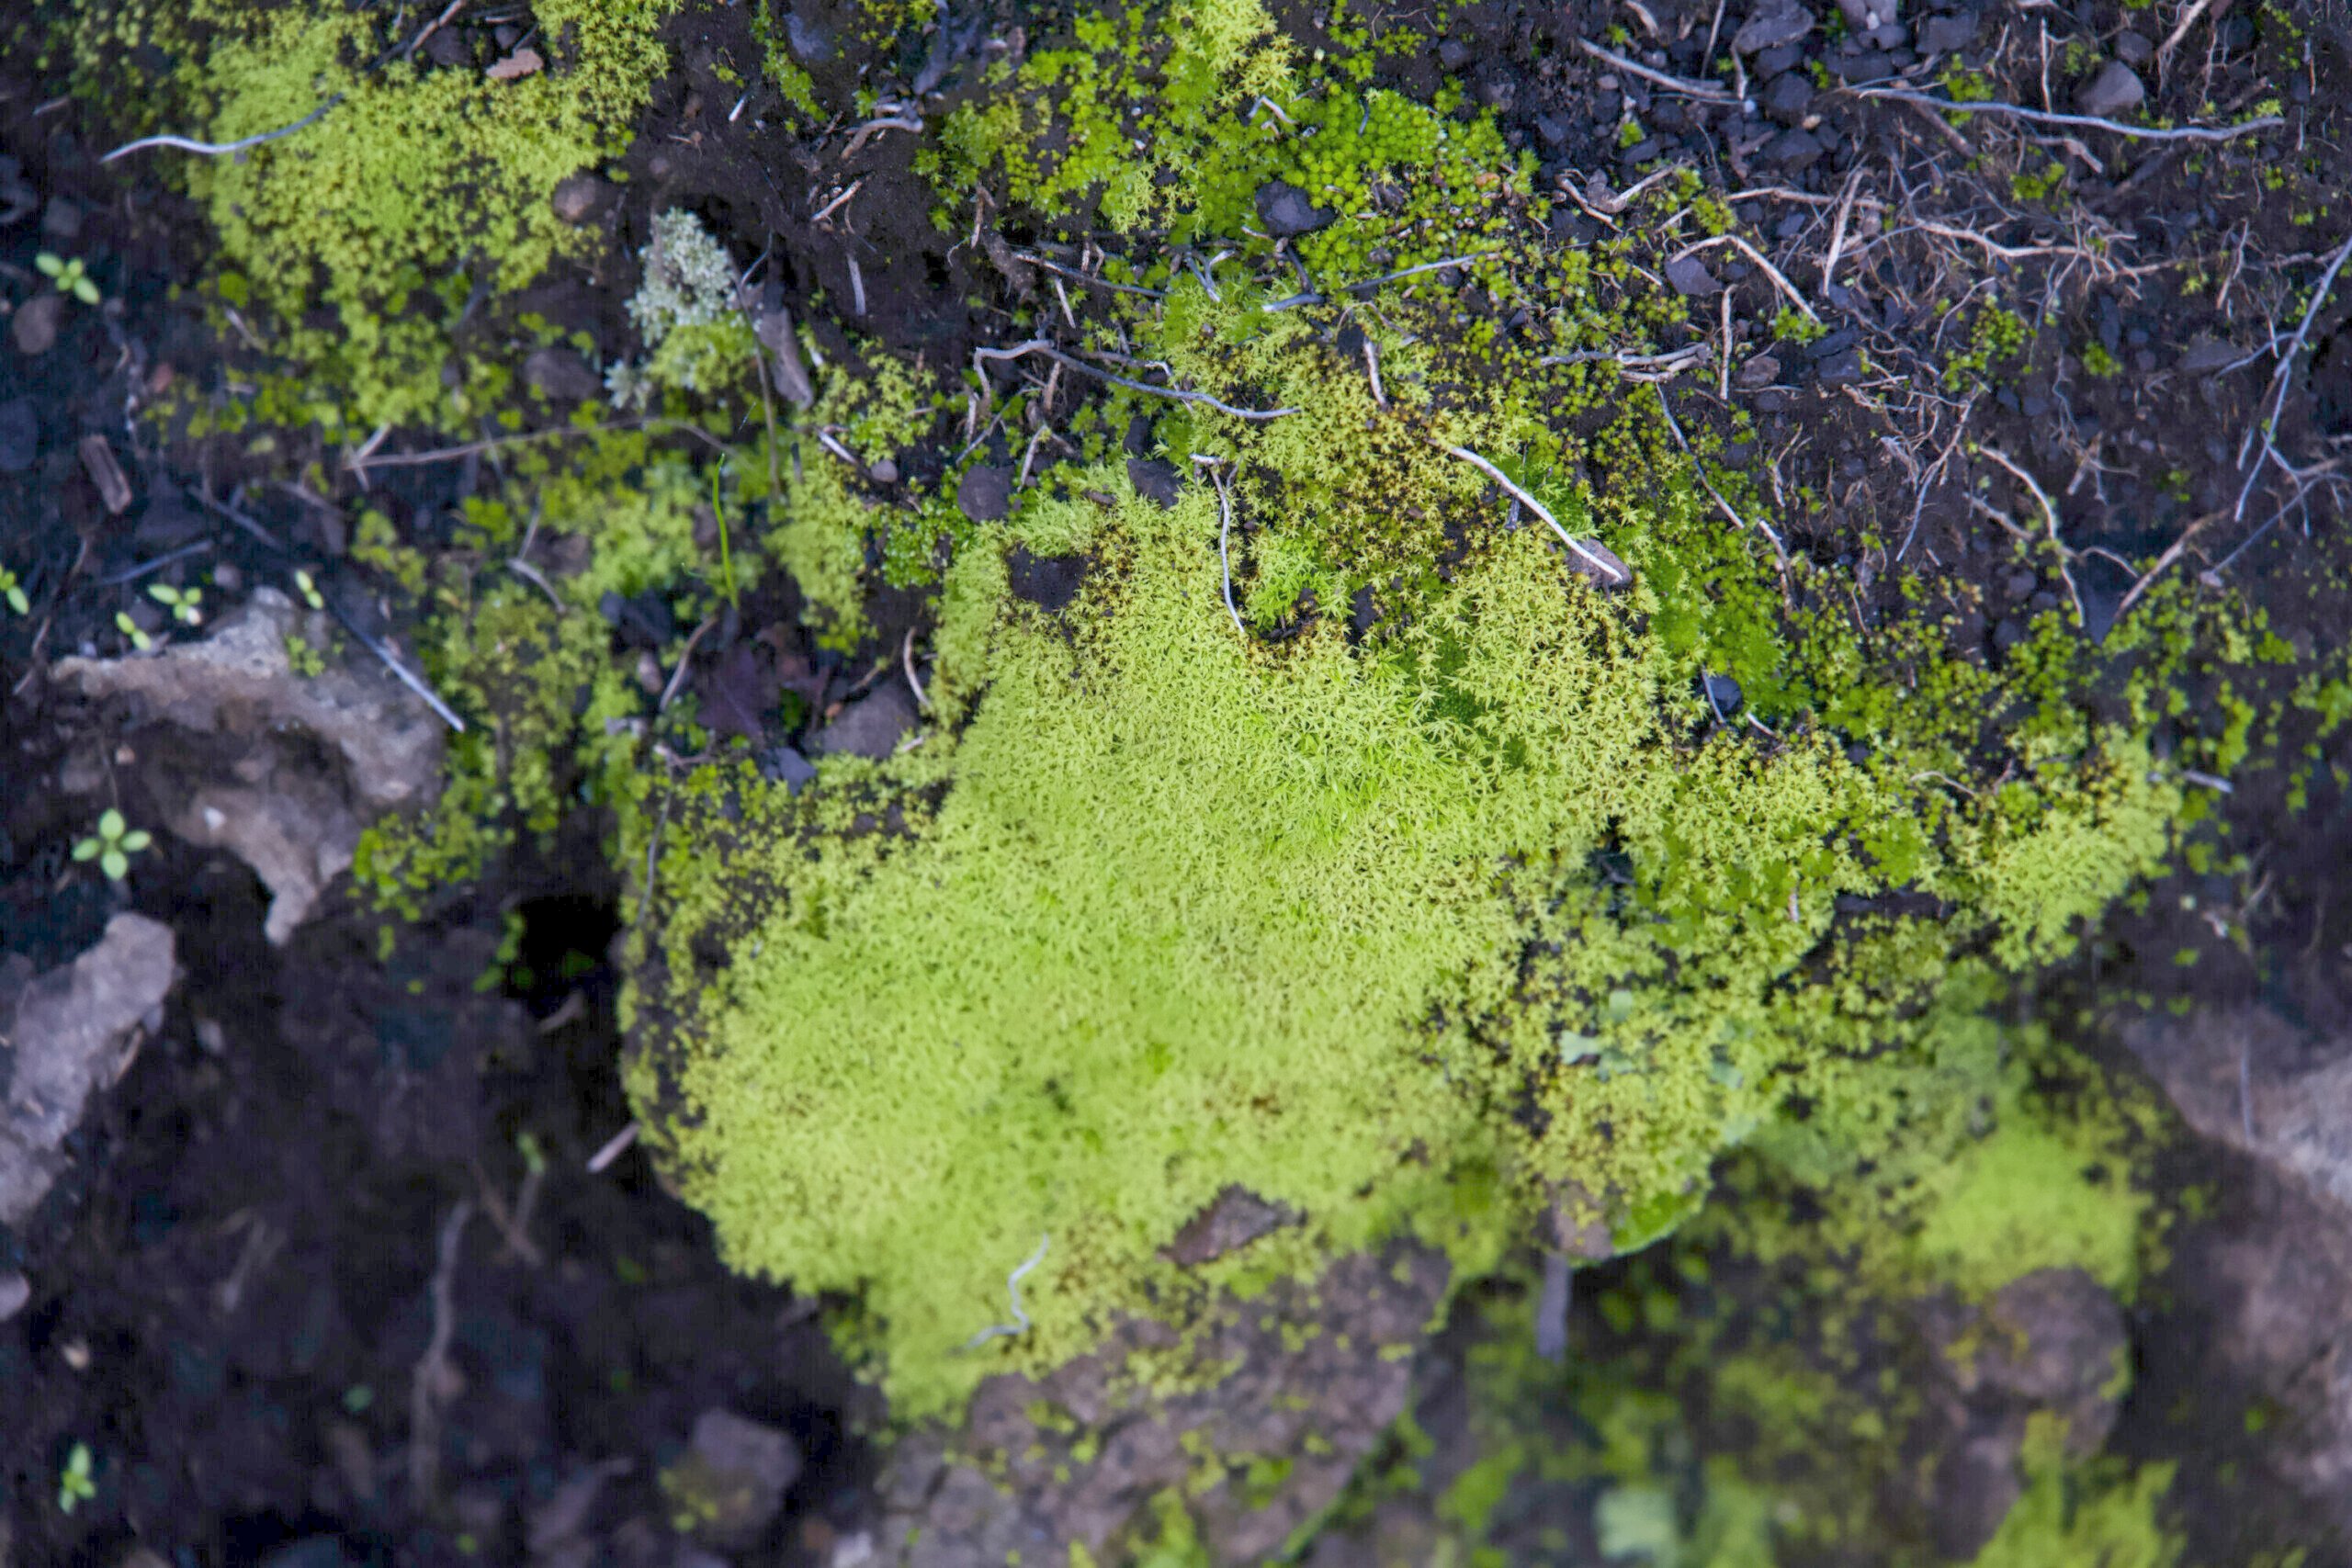 Close-up of vibrant green moss and small plants growing on dark soil along the Santa Monica Mountains Backbone Trail.